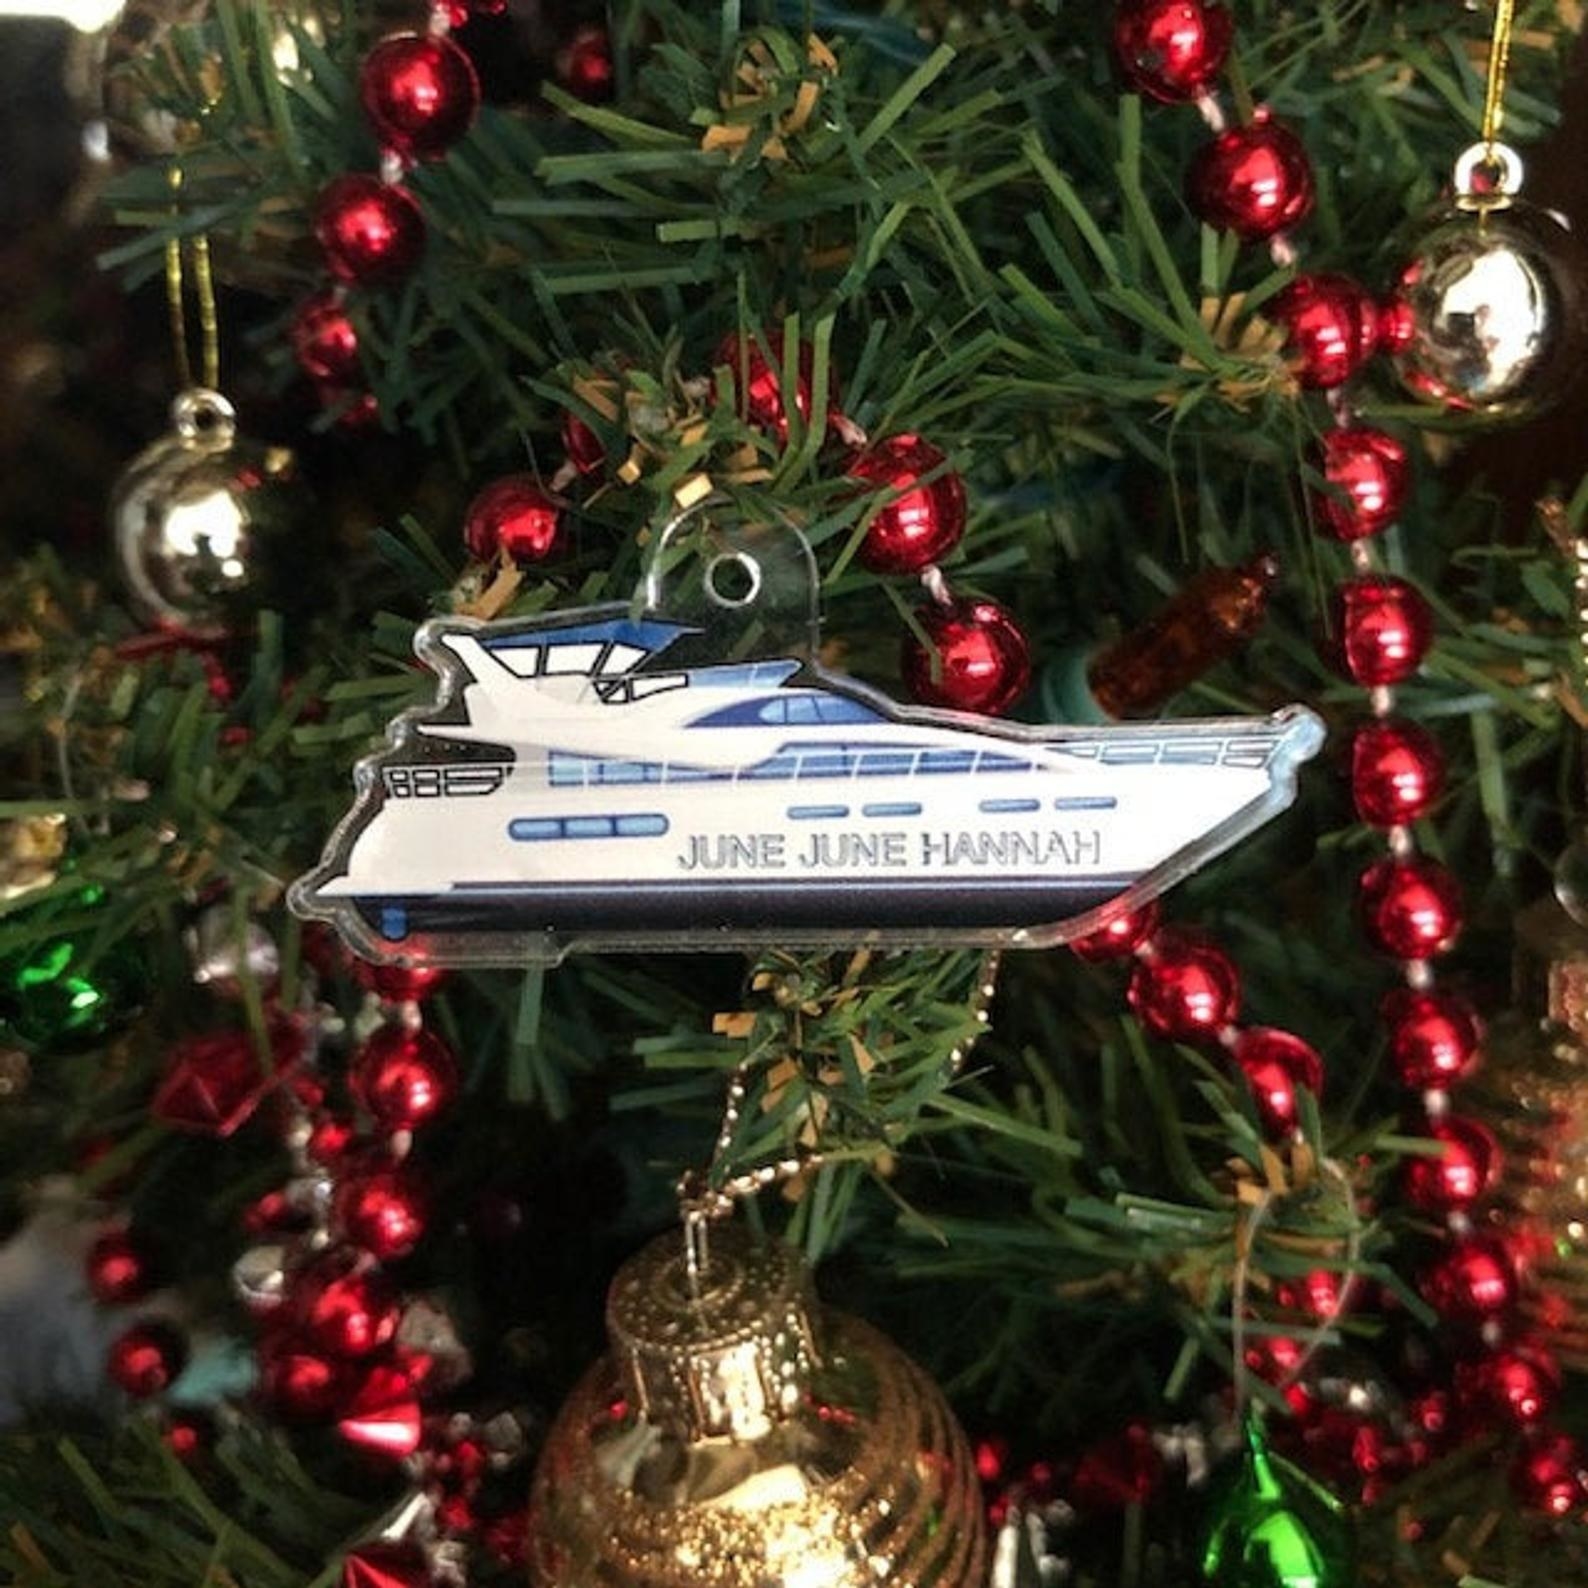 a boat shaped ornament with june june hannah on it